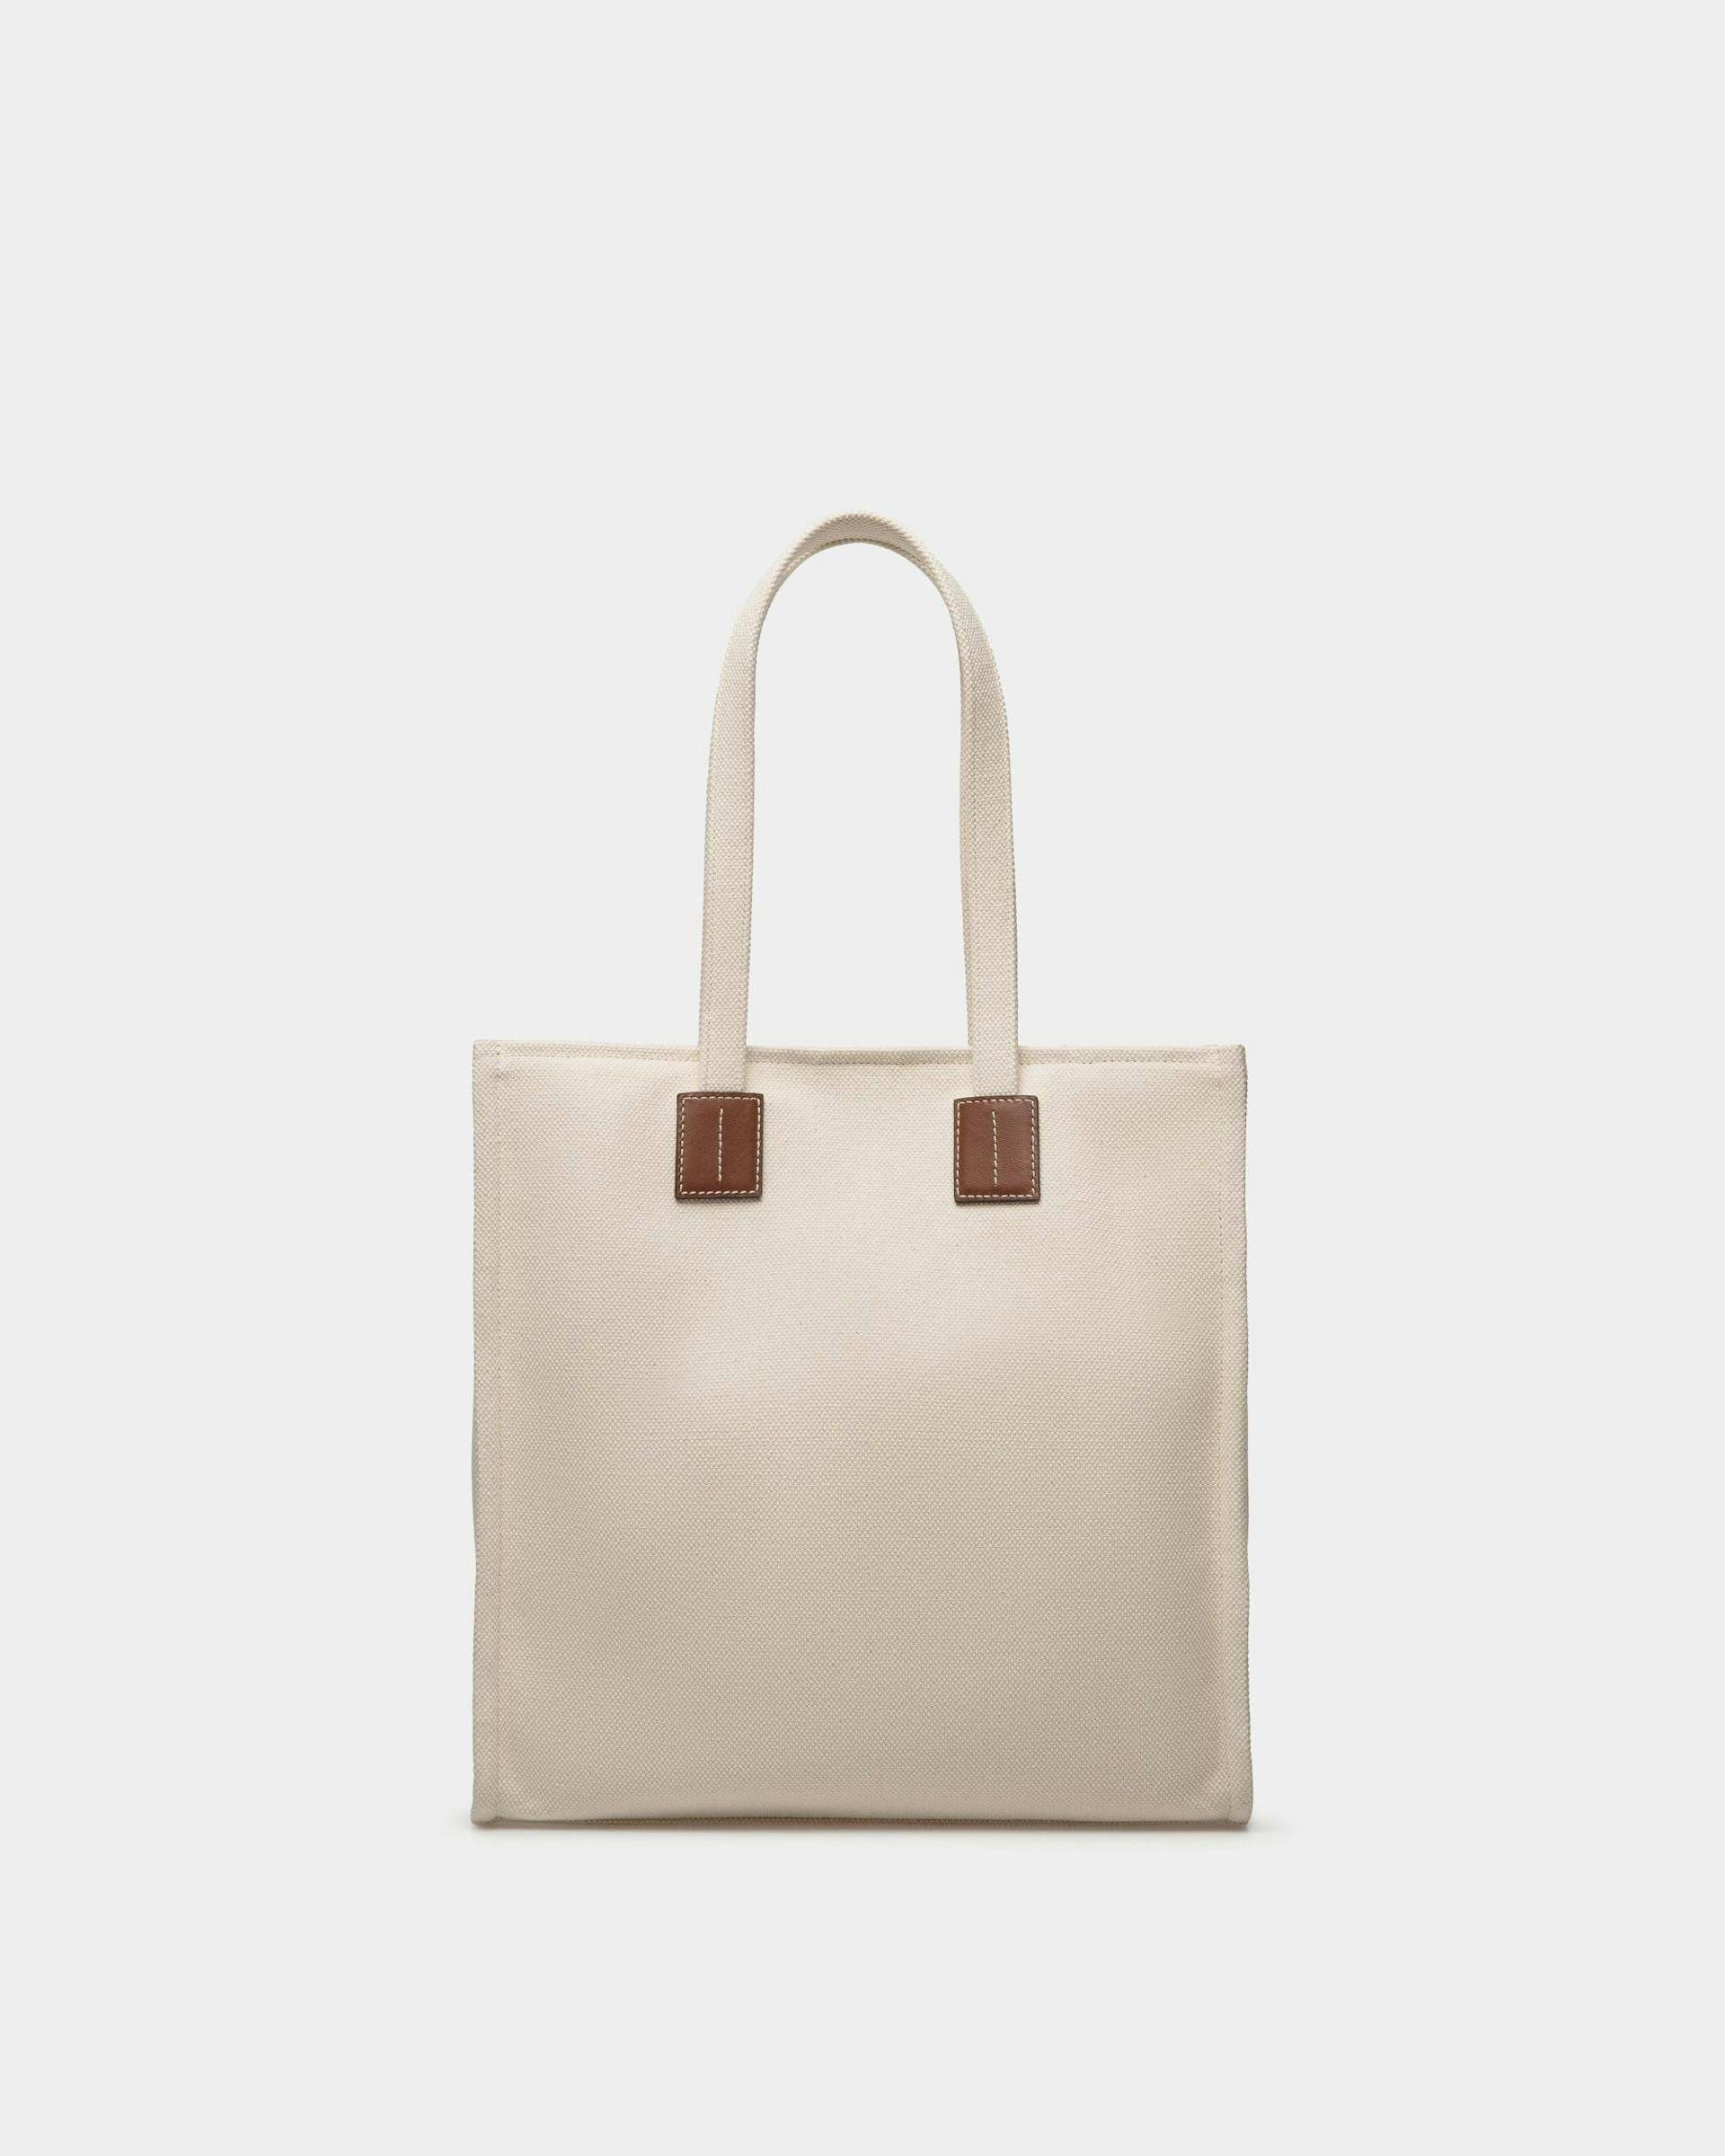 Women's Akelei Tote Bag in Canvas | Bally | Still Life Back